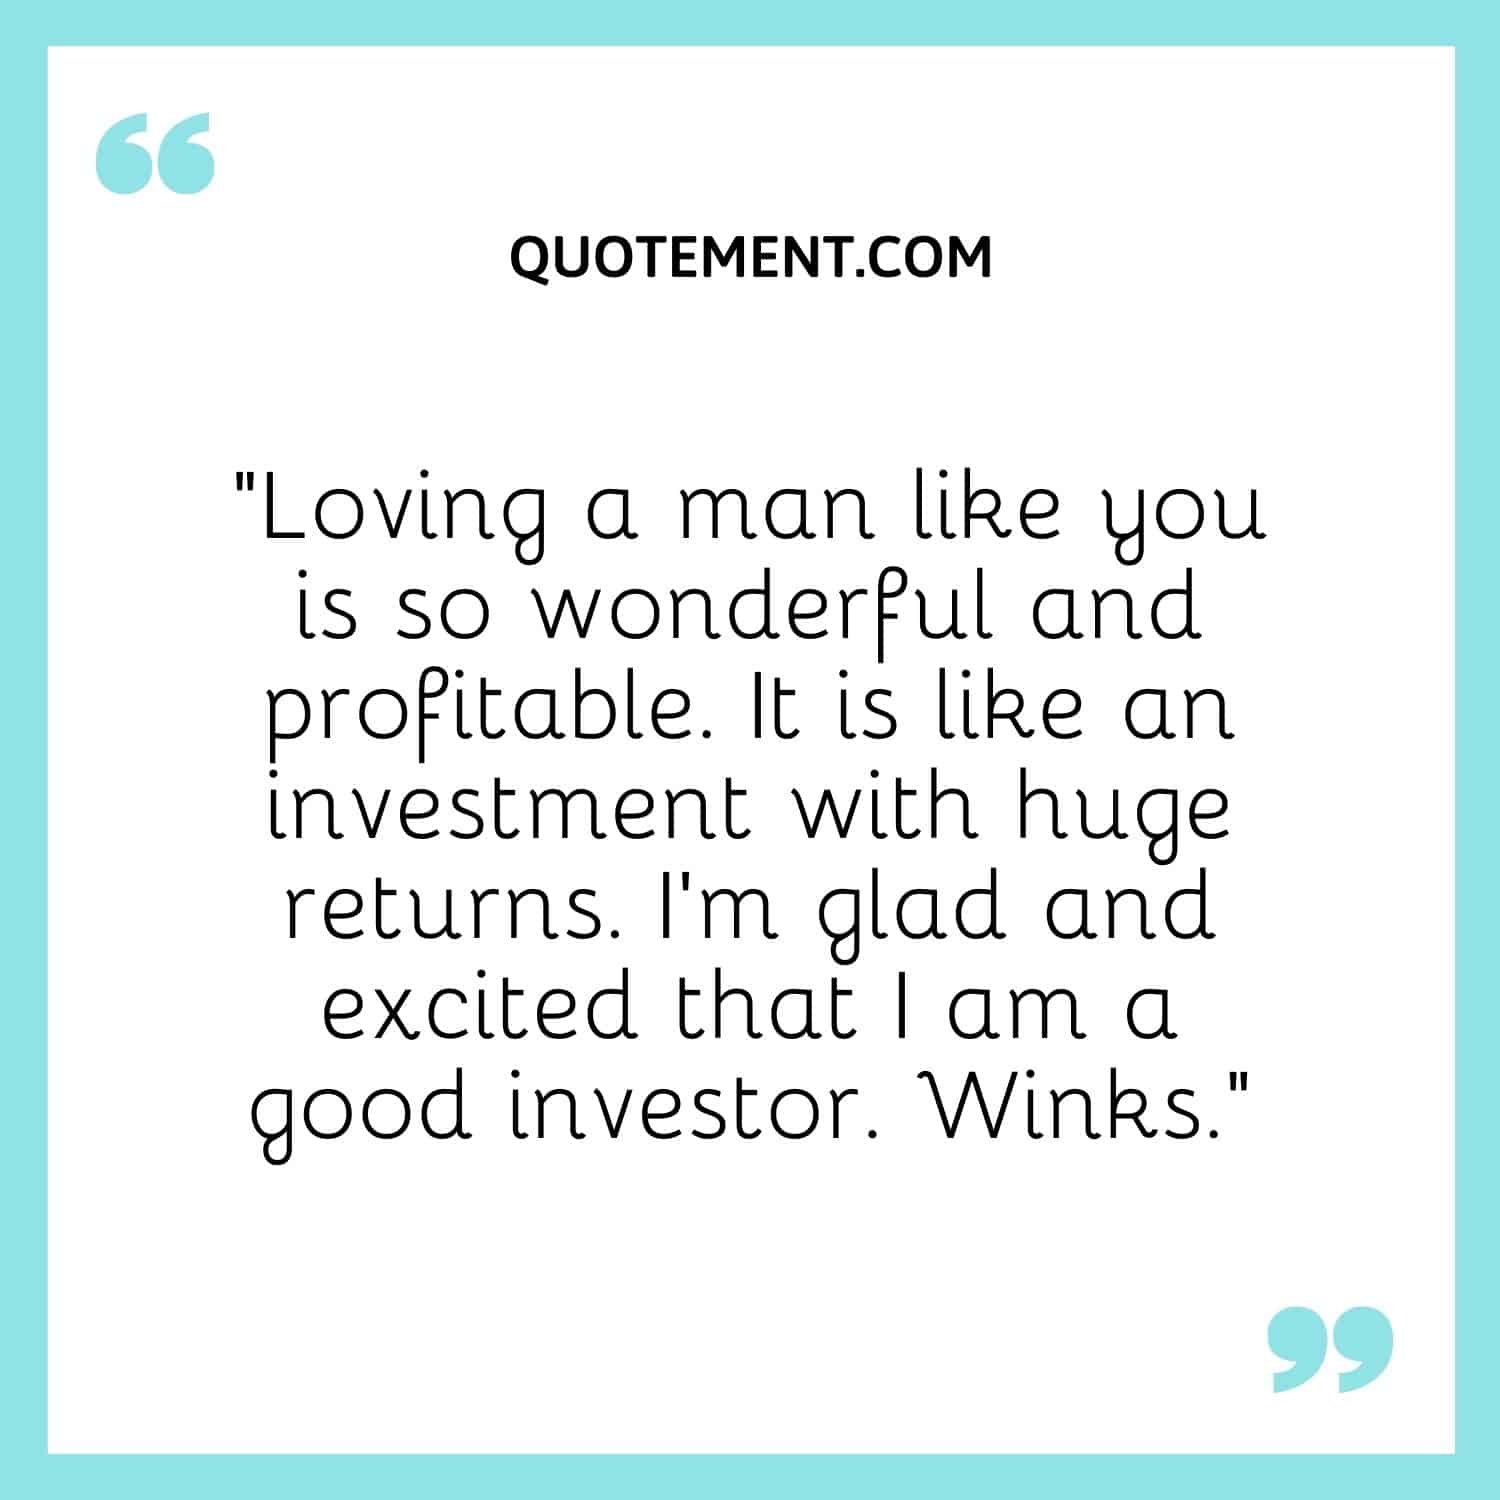 “Loving a man like you is so wonderful and profitable. It is like an investment with huge returns. I’m glad and excited that I am a good investor. Winks.”